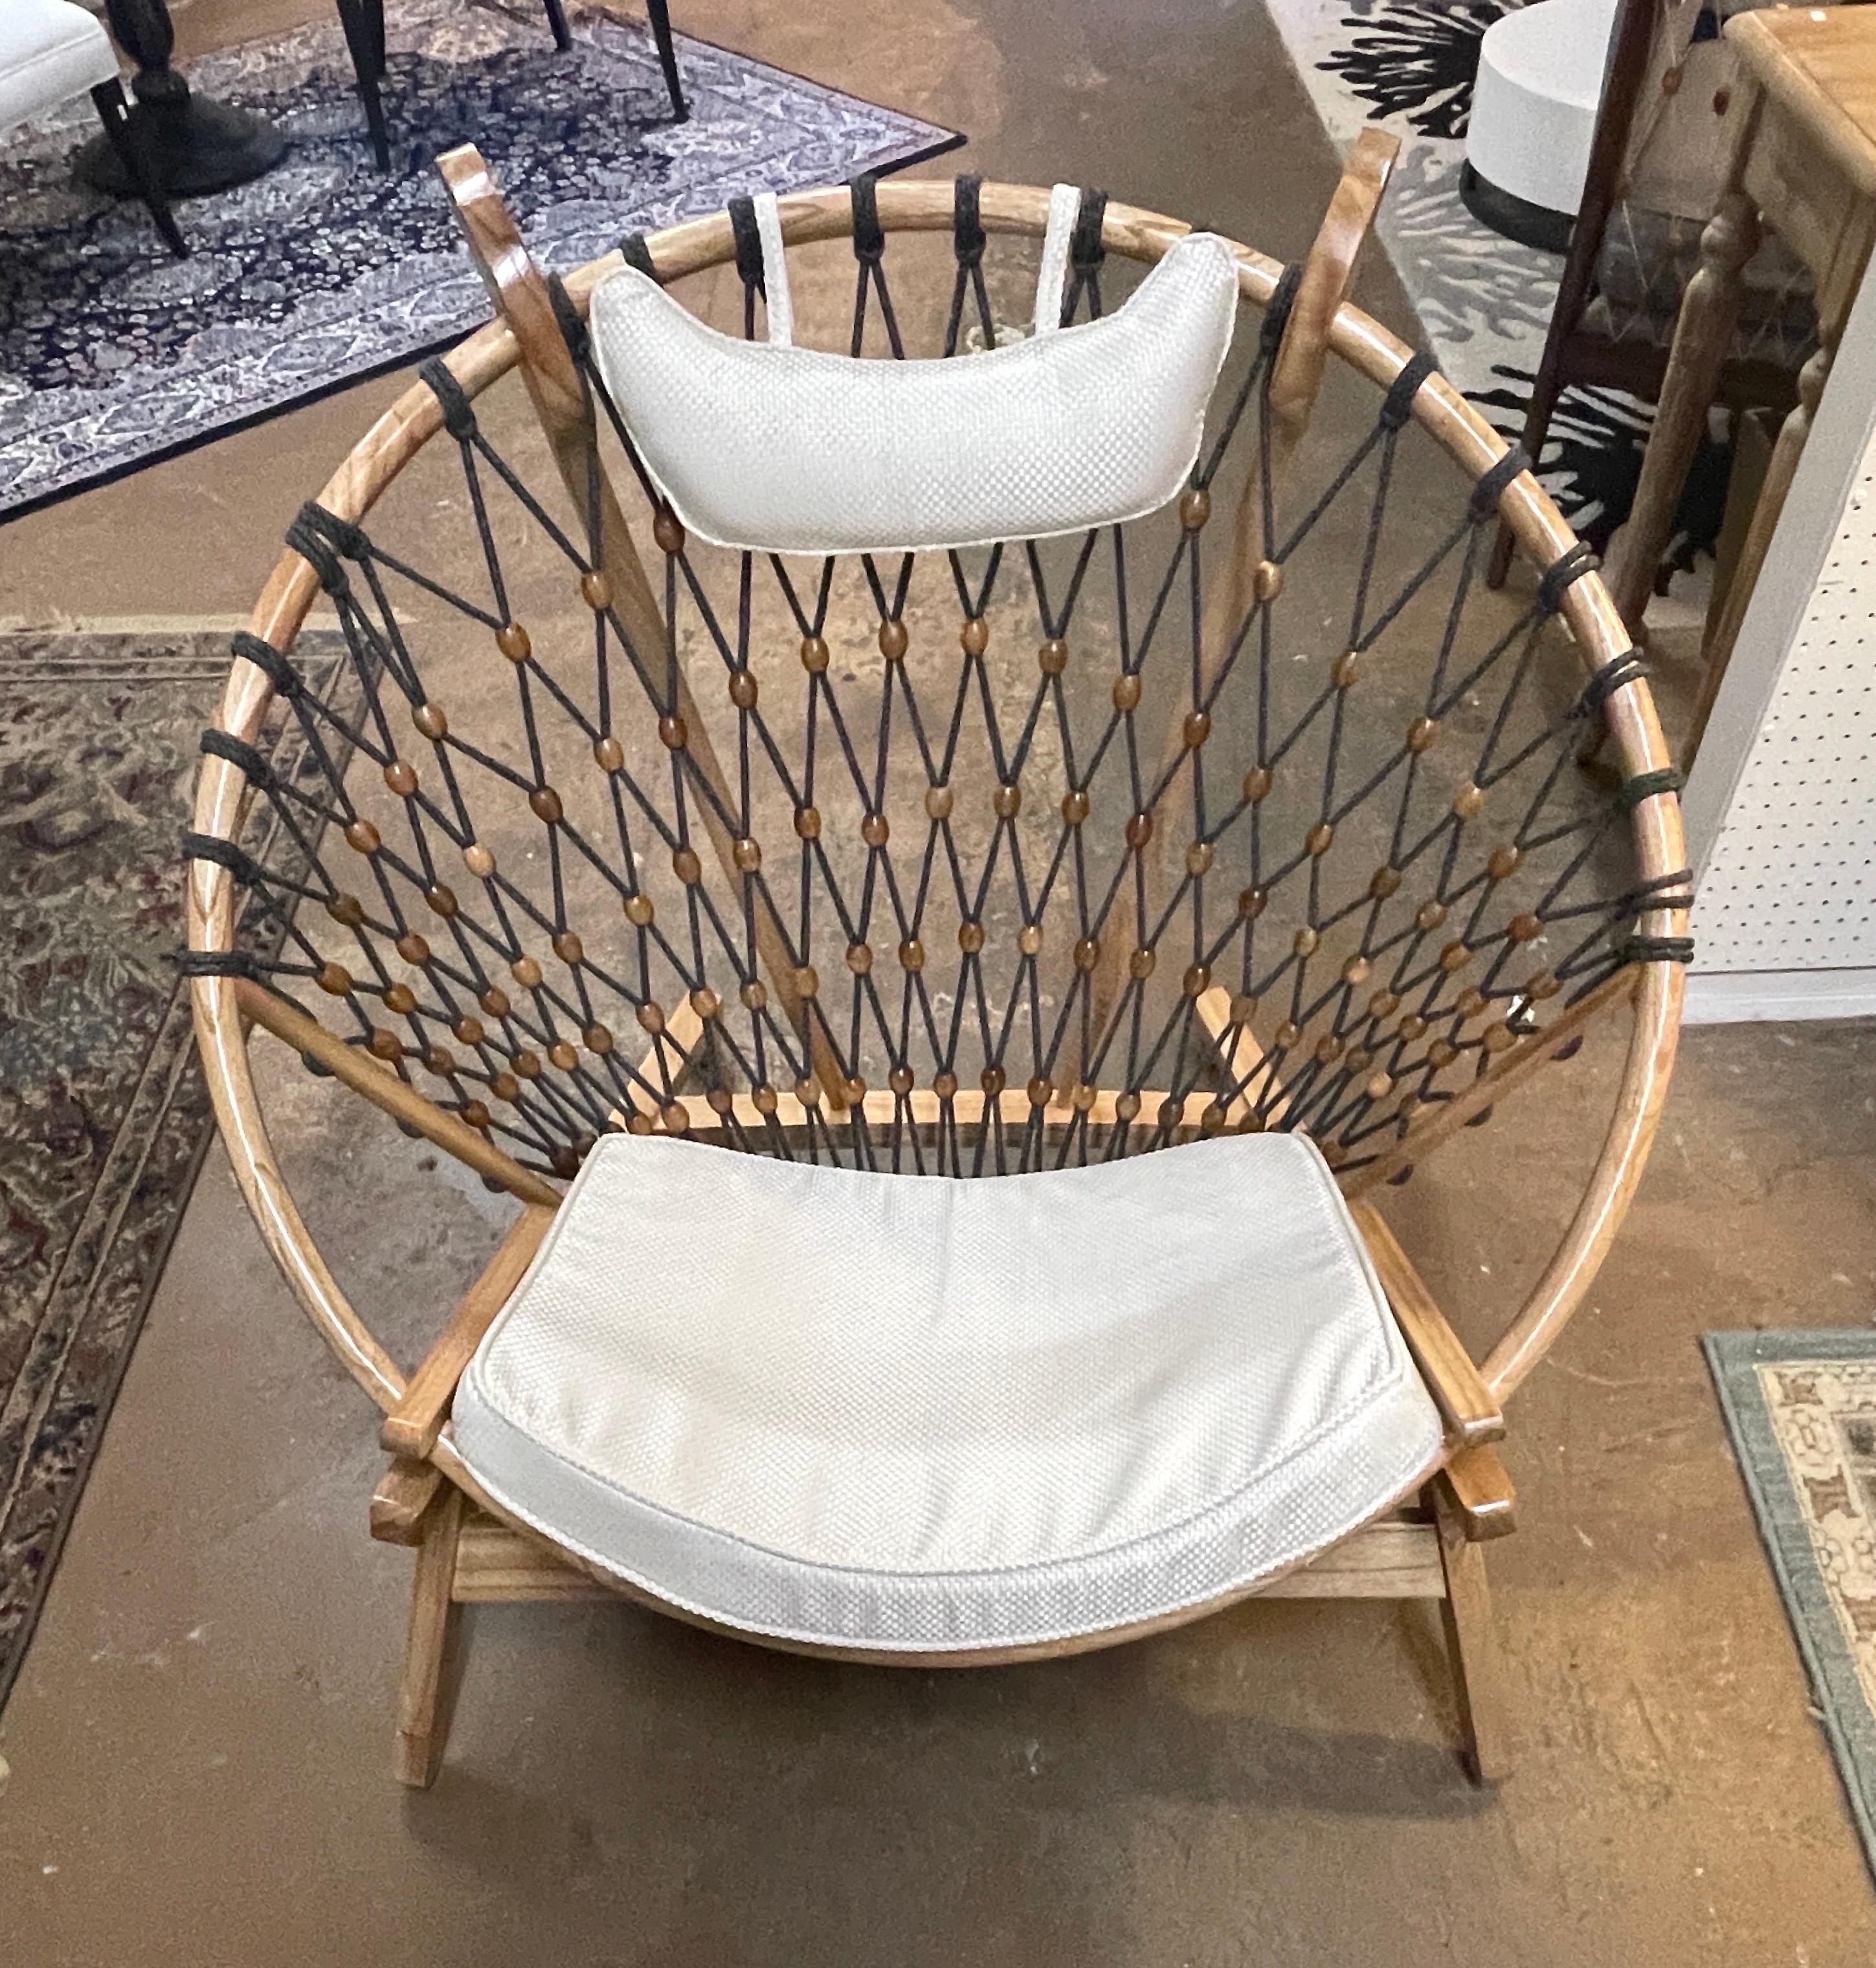 Modern Round 'Snowshoe' Wood & Woven Rope Lounge Chair, 4 Available 
Warehouse Inventory find of 4 unique organic sculptural lounge chairs, can be used indoors or outdoors. Sold Individually 
Design influences of the American Indian Ute Indian